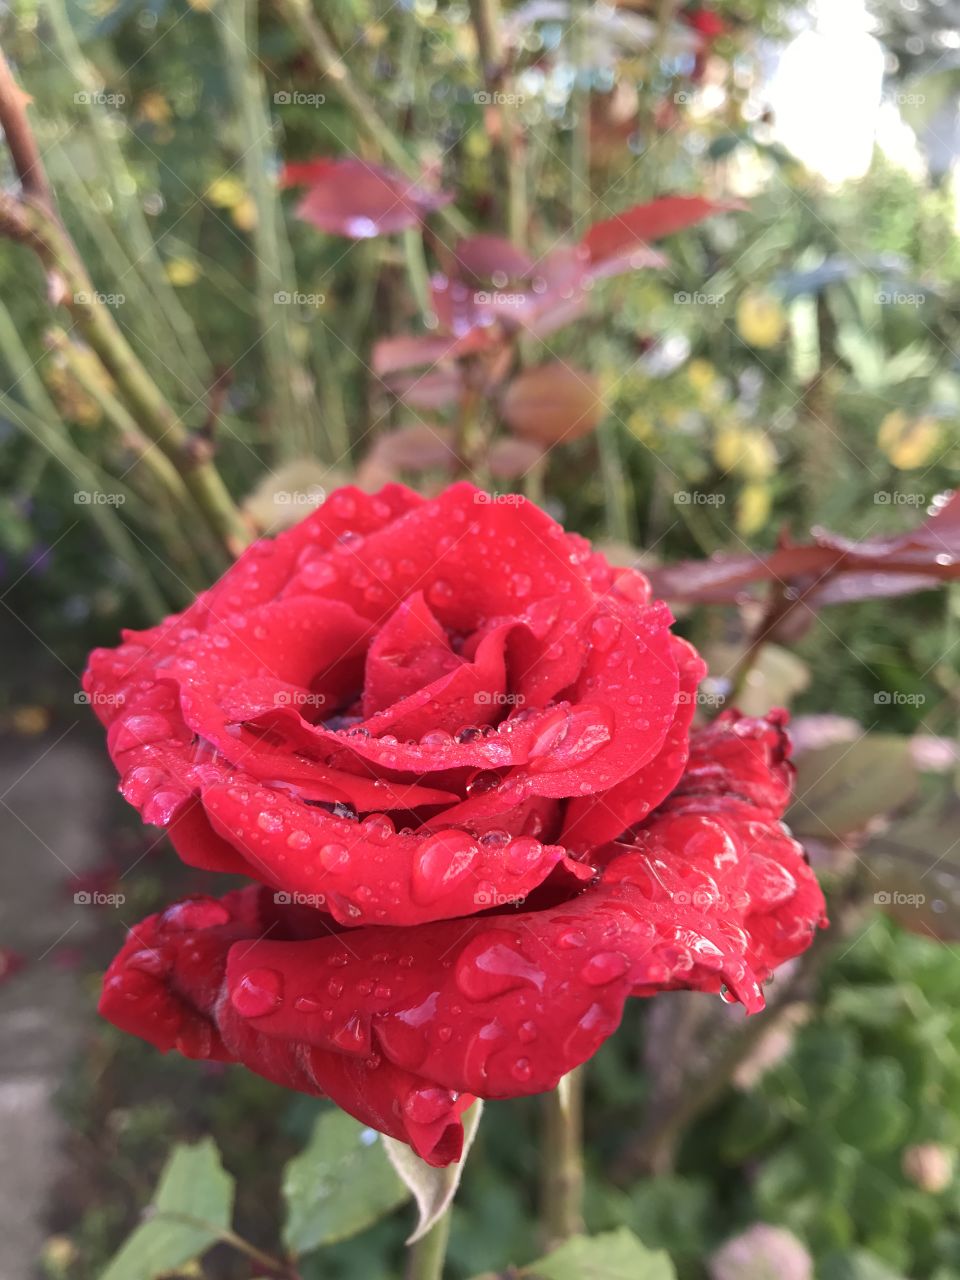 Res rose on a rainy day with raindrops on its petals.